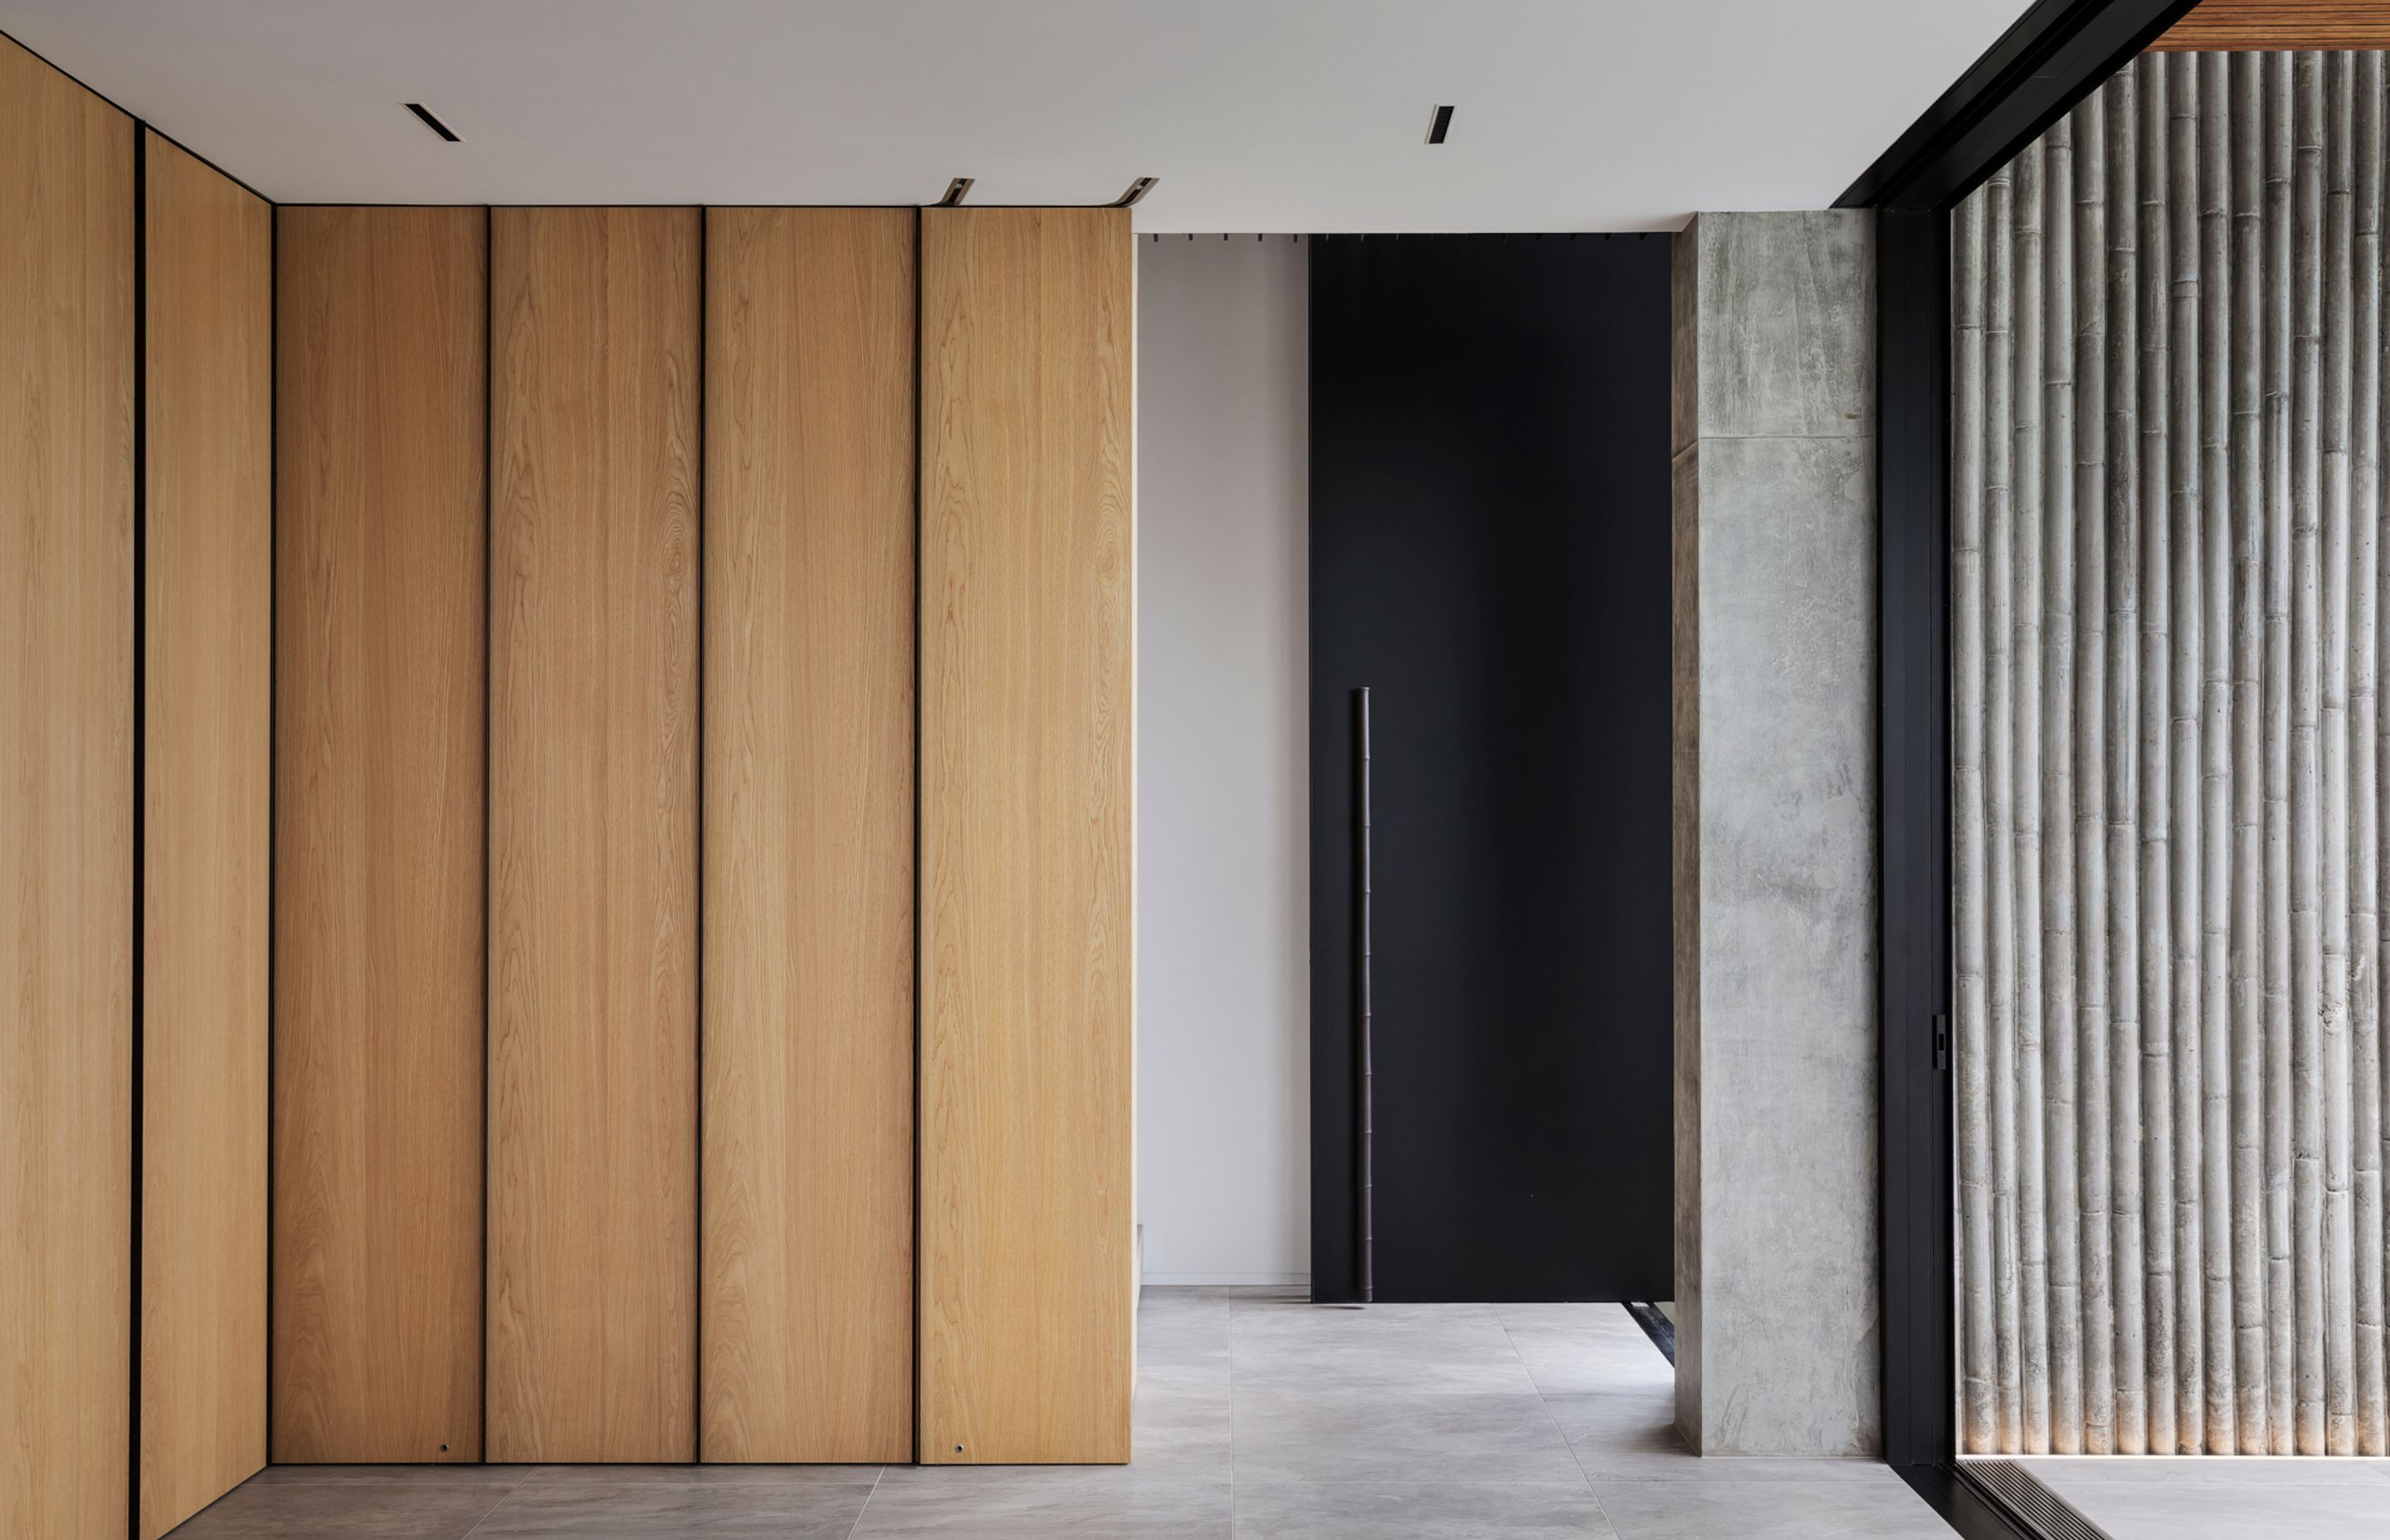 Sliding doors open up to reveal a full bar set-upm, while the front door features a metal bamboo handle, complementing the bamboo-shuttered in-situ concrete wall.